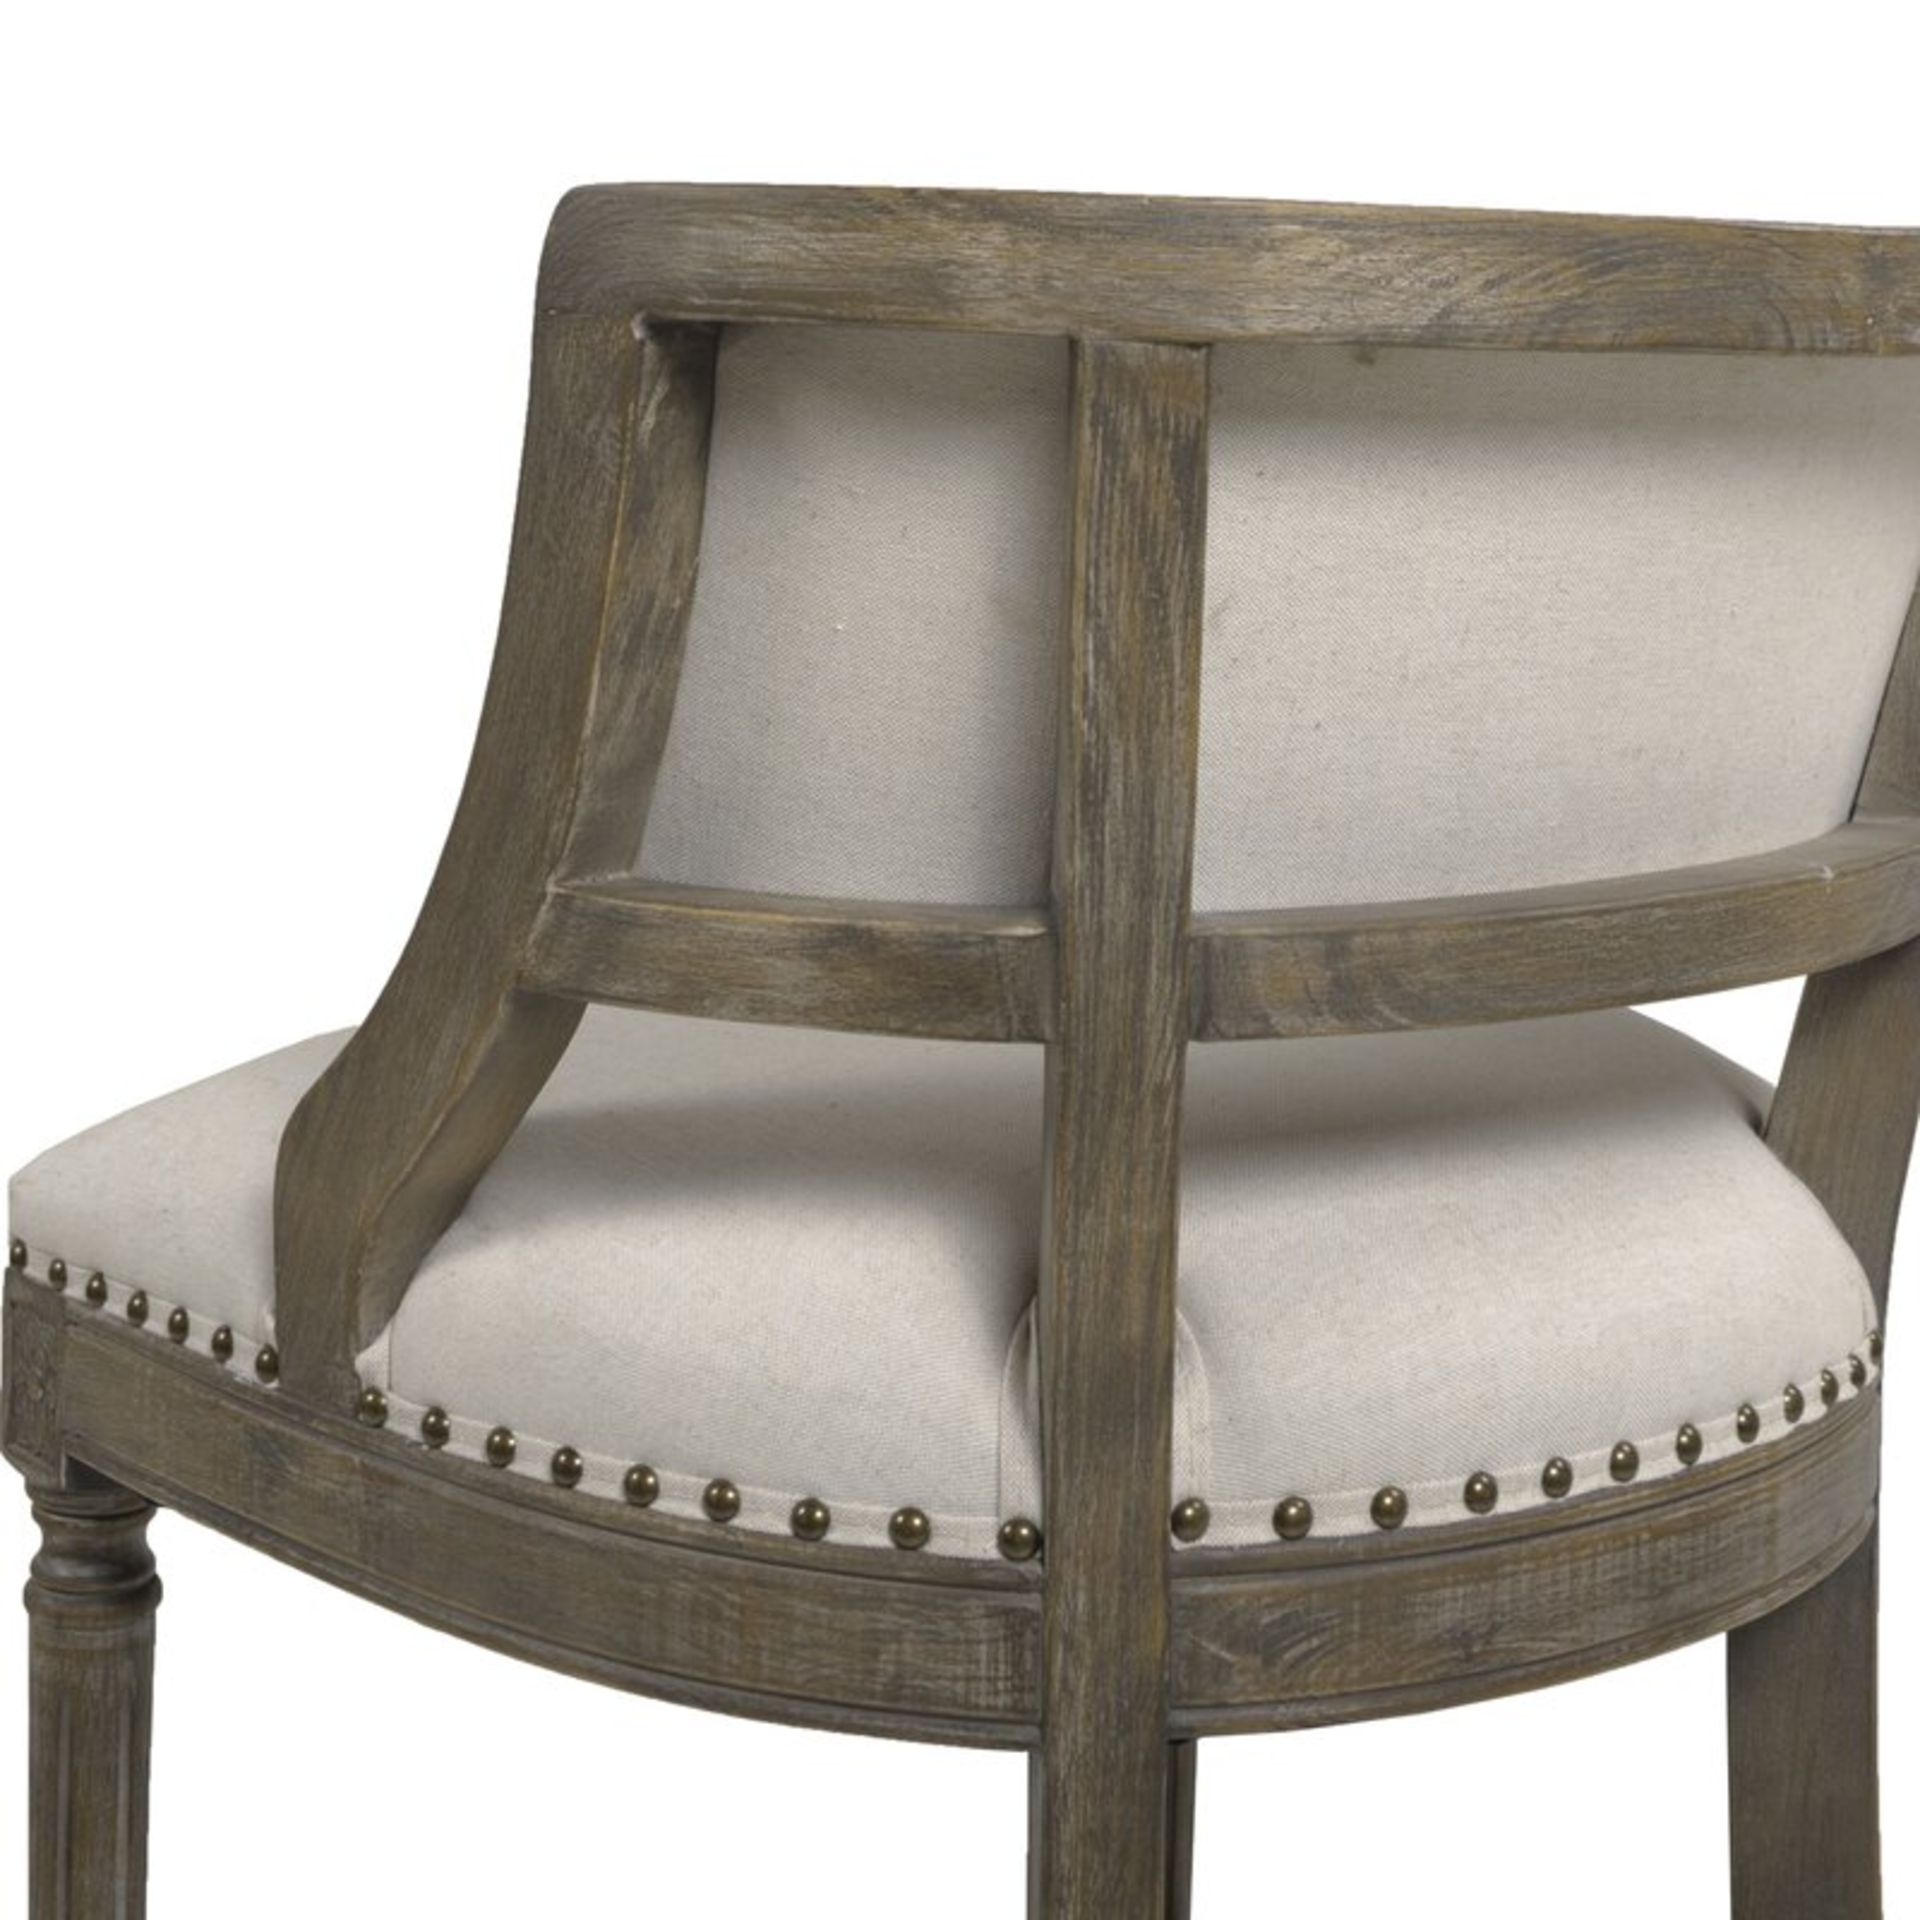 Grice Bar Stool 30 inch Beige by Jennifer Taylor Home - Image 5 of 7